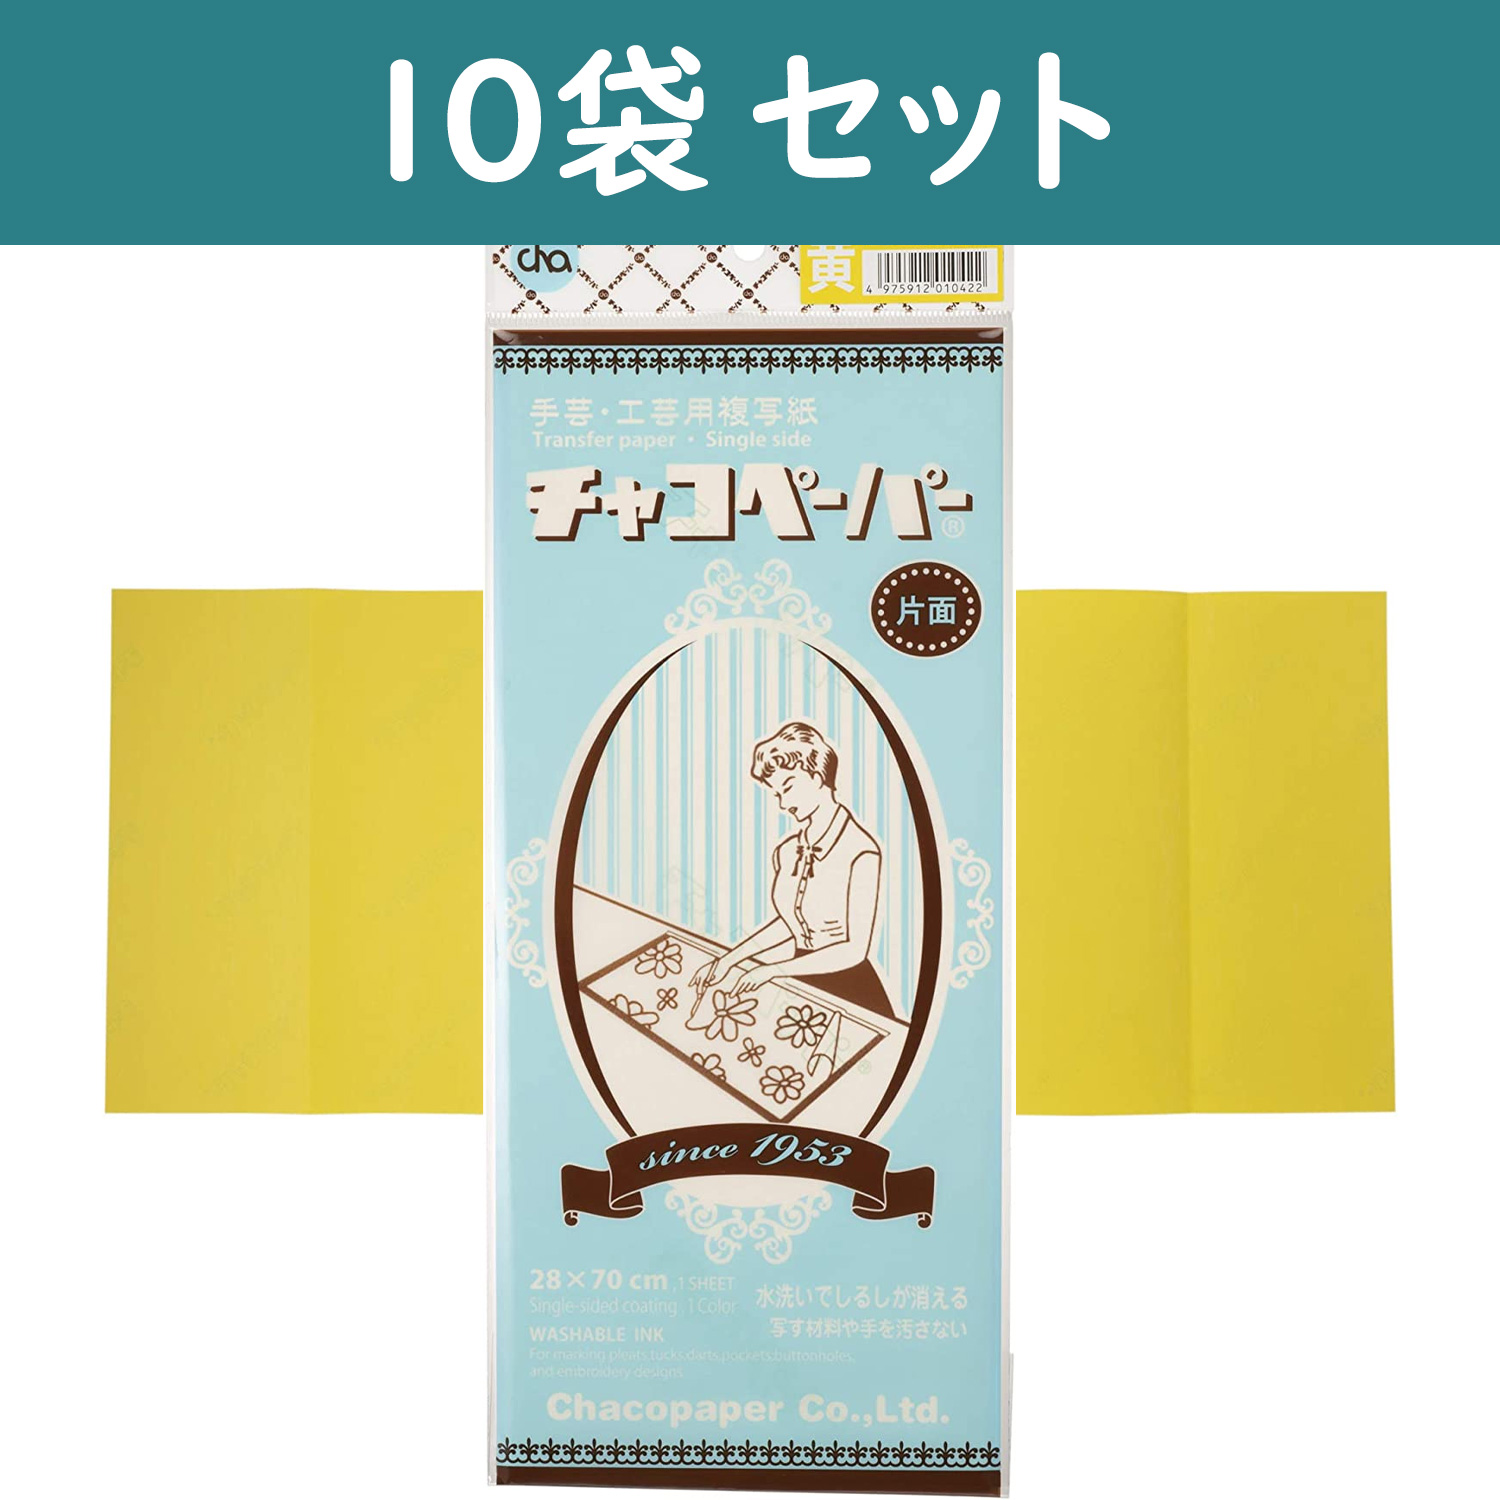 CY-F4-4-10  One-sided Chaco Paper Large 70 x 28cm Yellow 10袋　(袋)